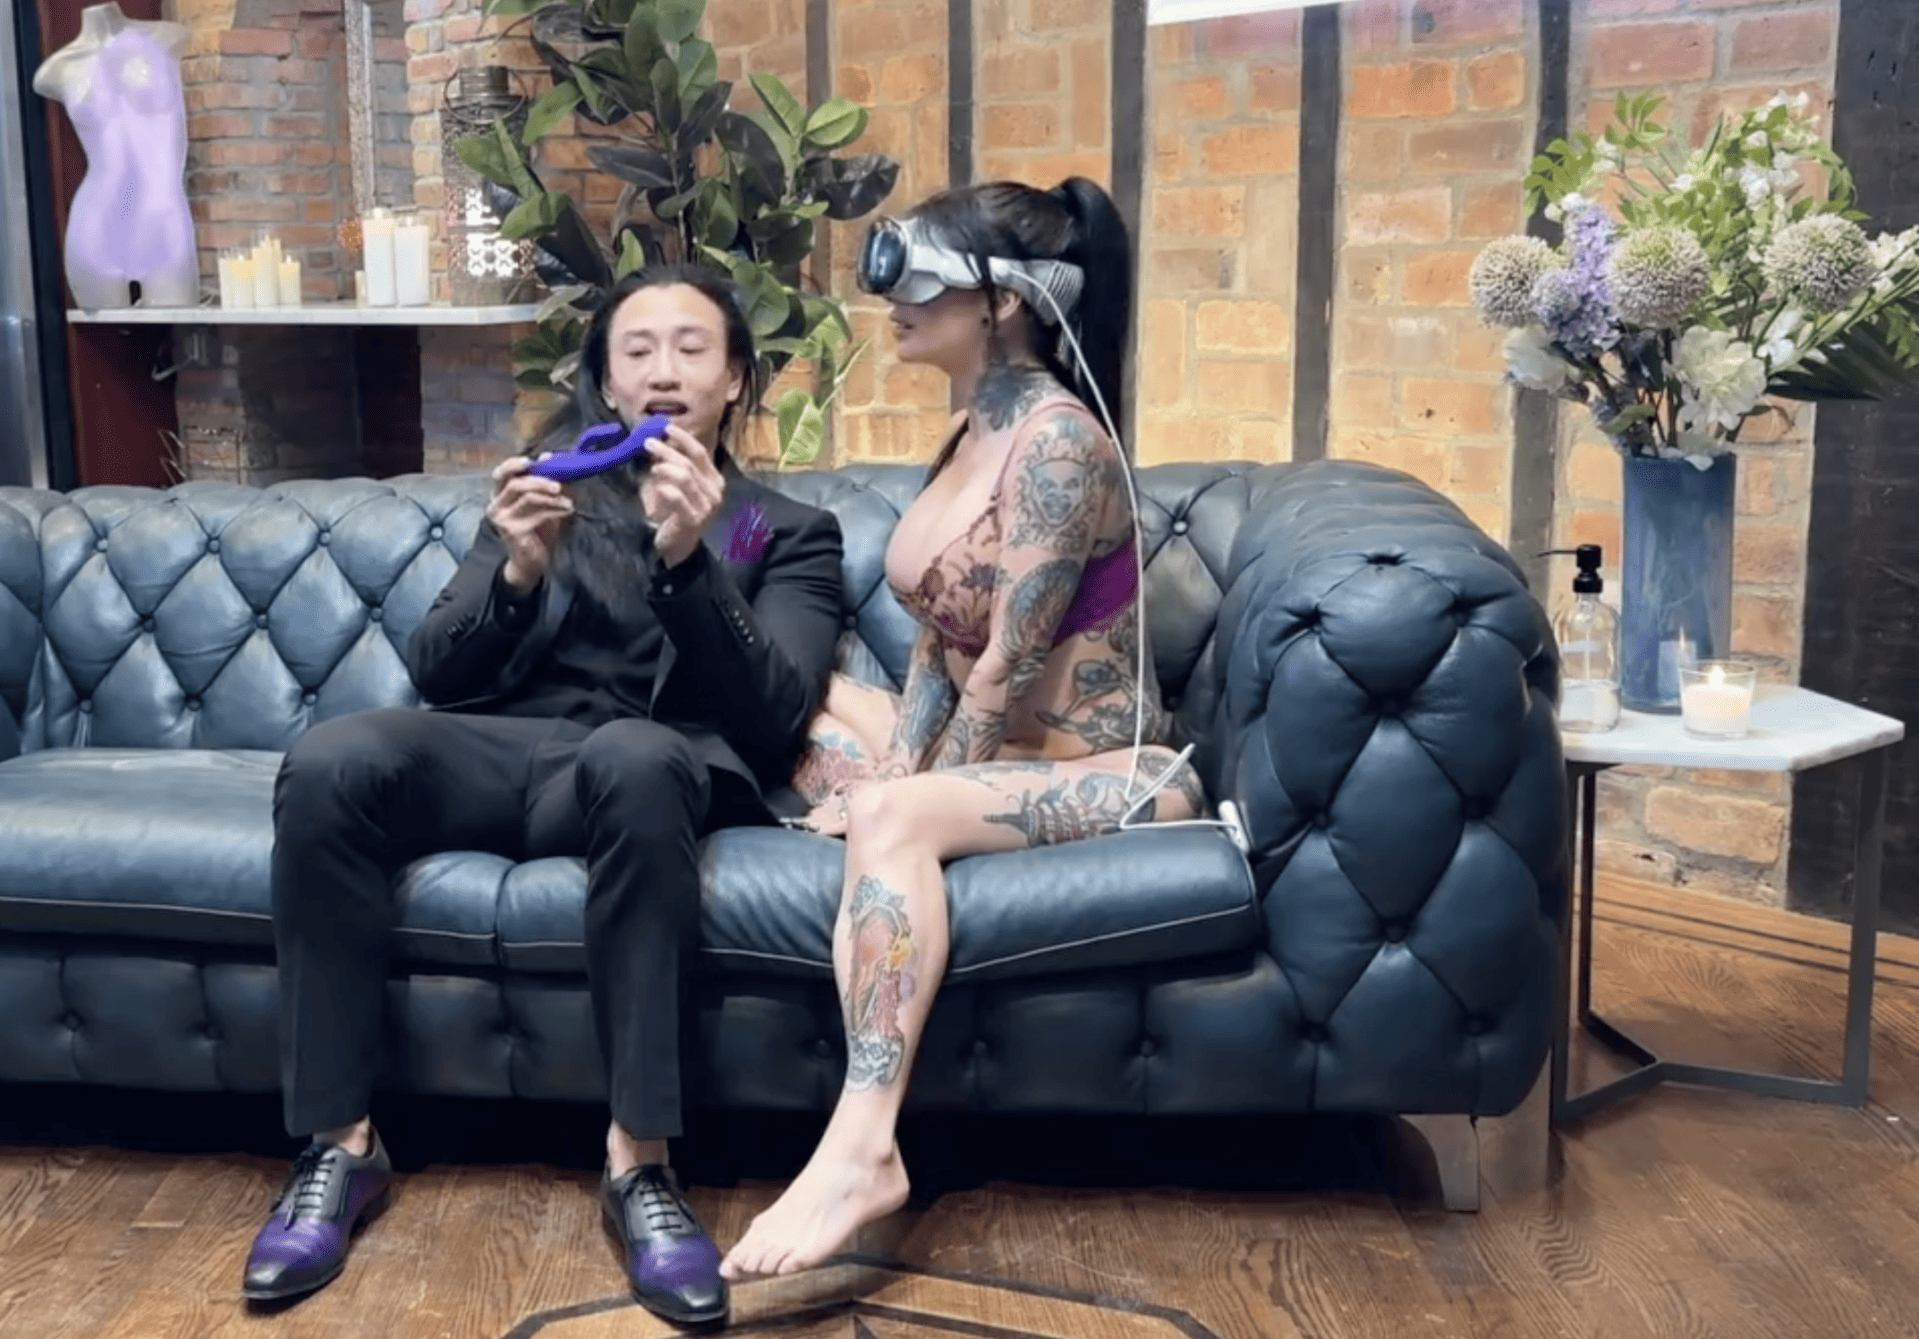 A man and woman sitting on a couch with tattoos.